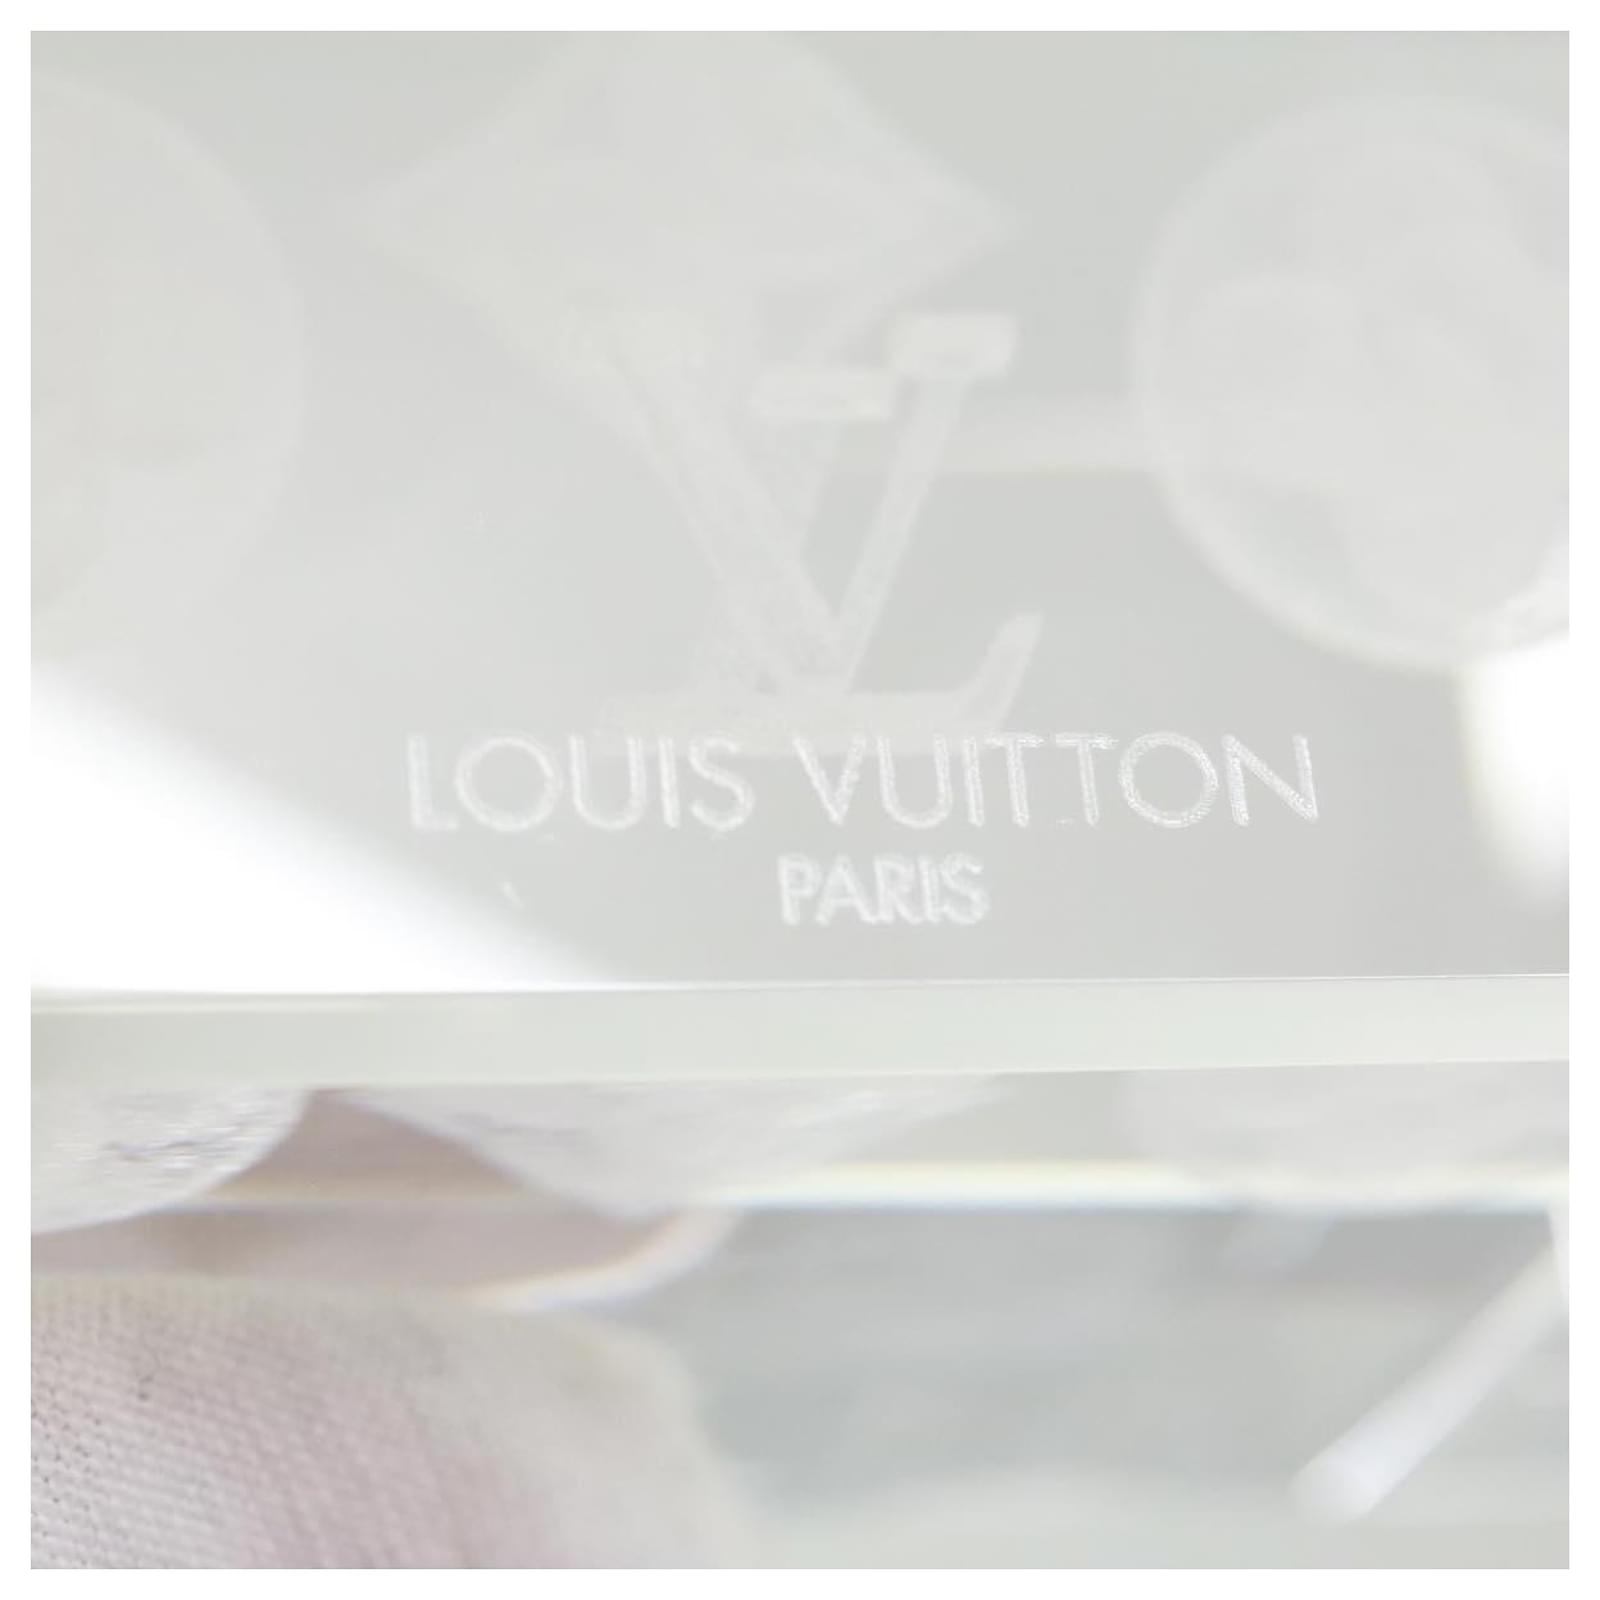 LOUIS VUITTON Monogram Pattern Paper weight Glass VIP only Clear